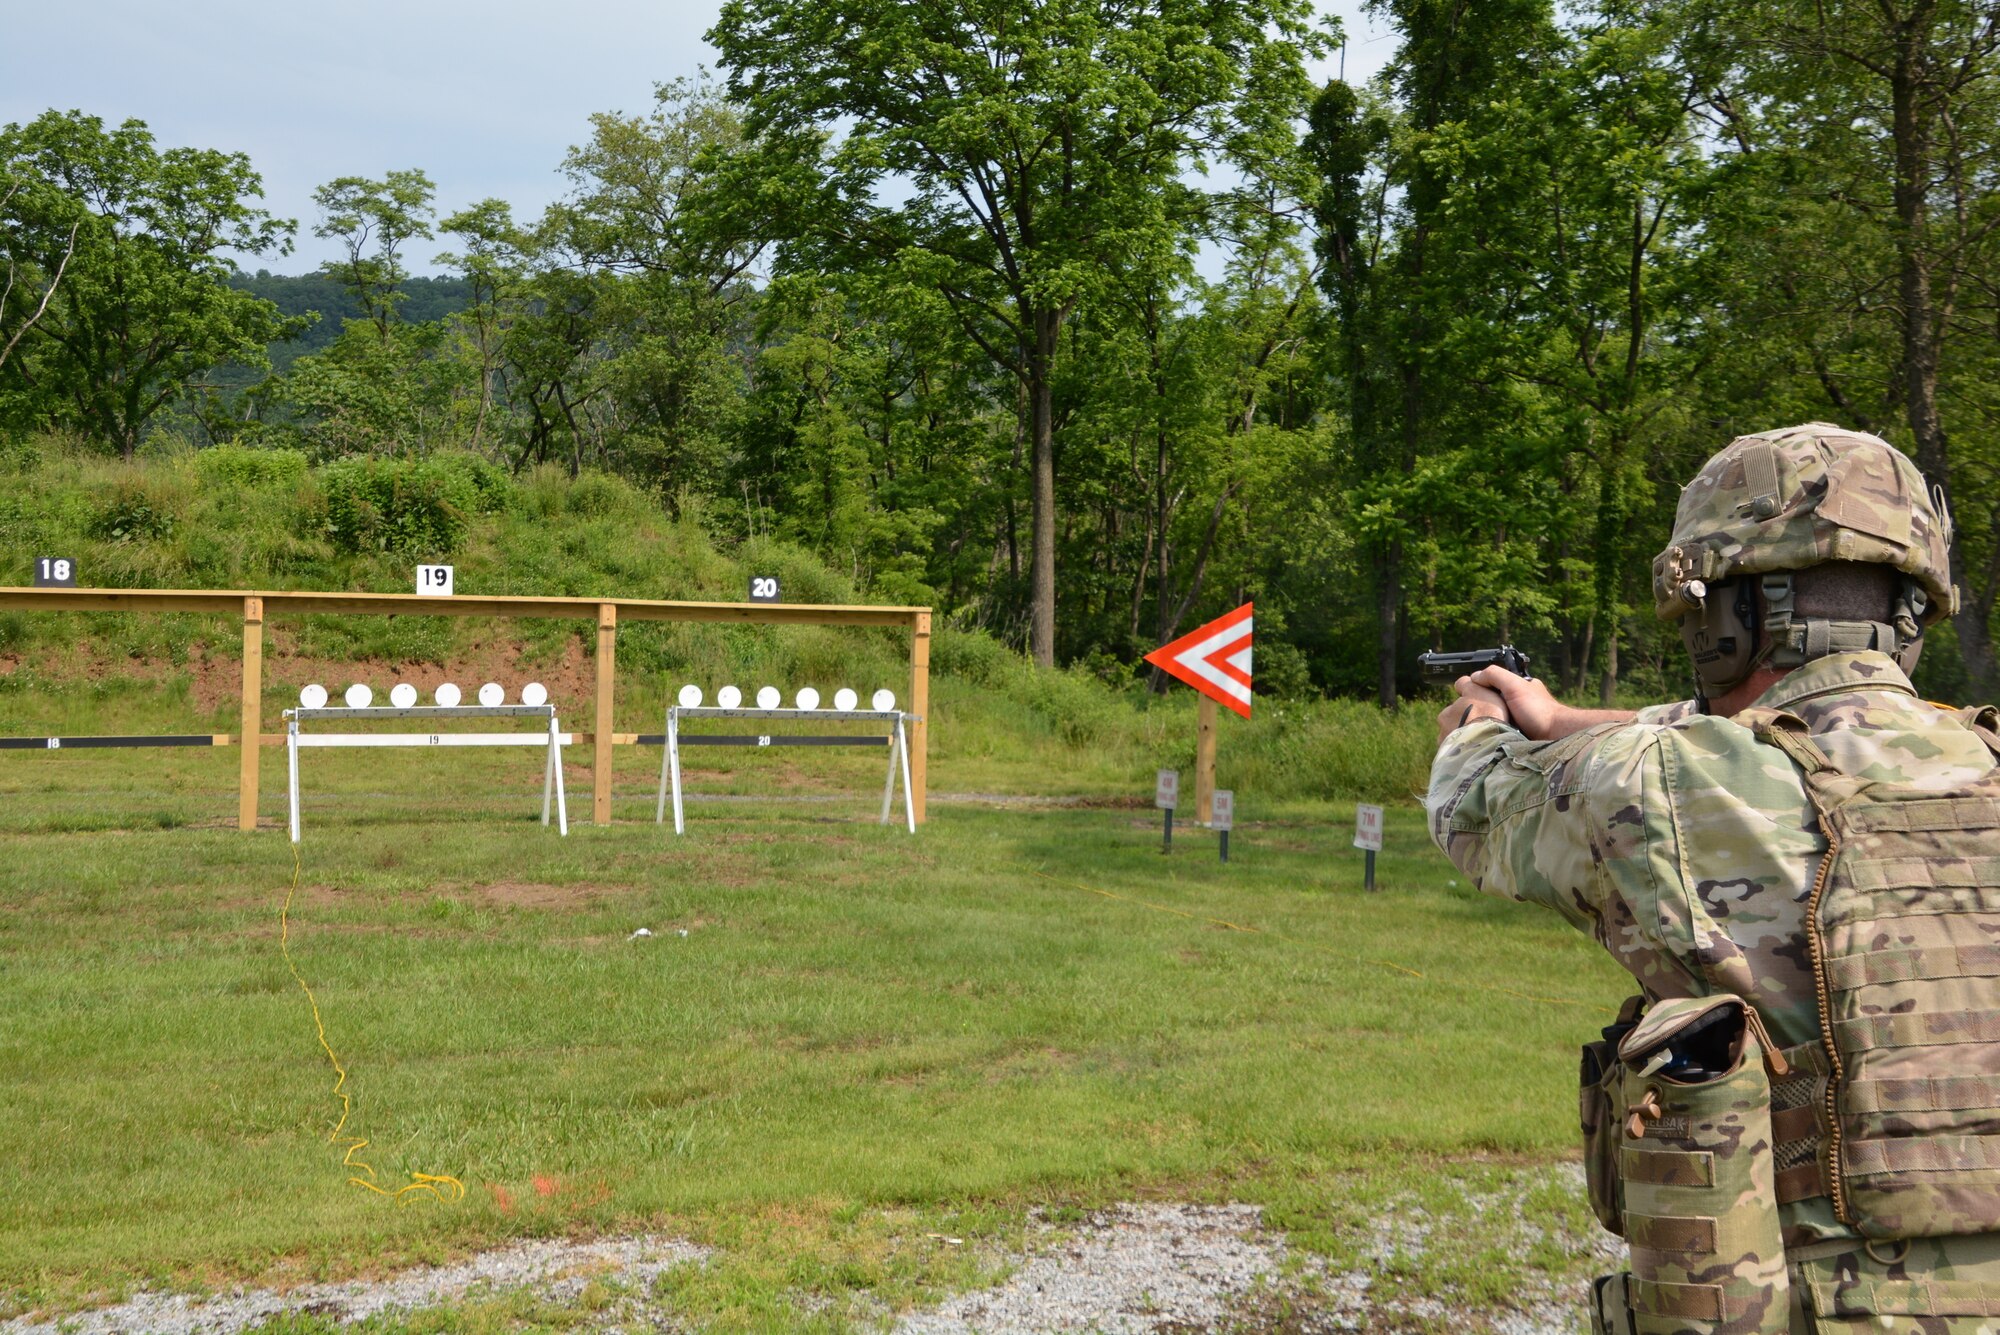 Staff Sgt. Duane Koons, assigned to 3rd Battalion, 166th Training Regiment, Pennsylvania National Guard takes aim during a pistol event at the Pennsylvania National Guard Adjutant General's Combined Arms Match June 2 at Fort Indiantown Gap. (U.S. Army National Guard photo by Lt. Col. Angela King-Sweigart)